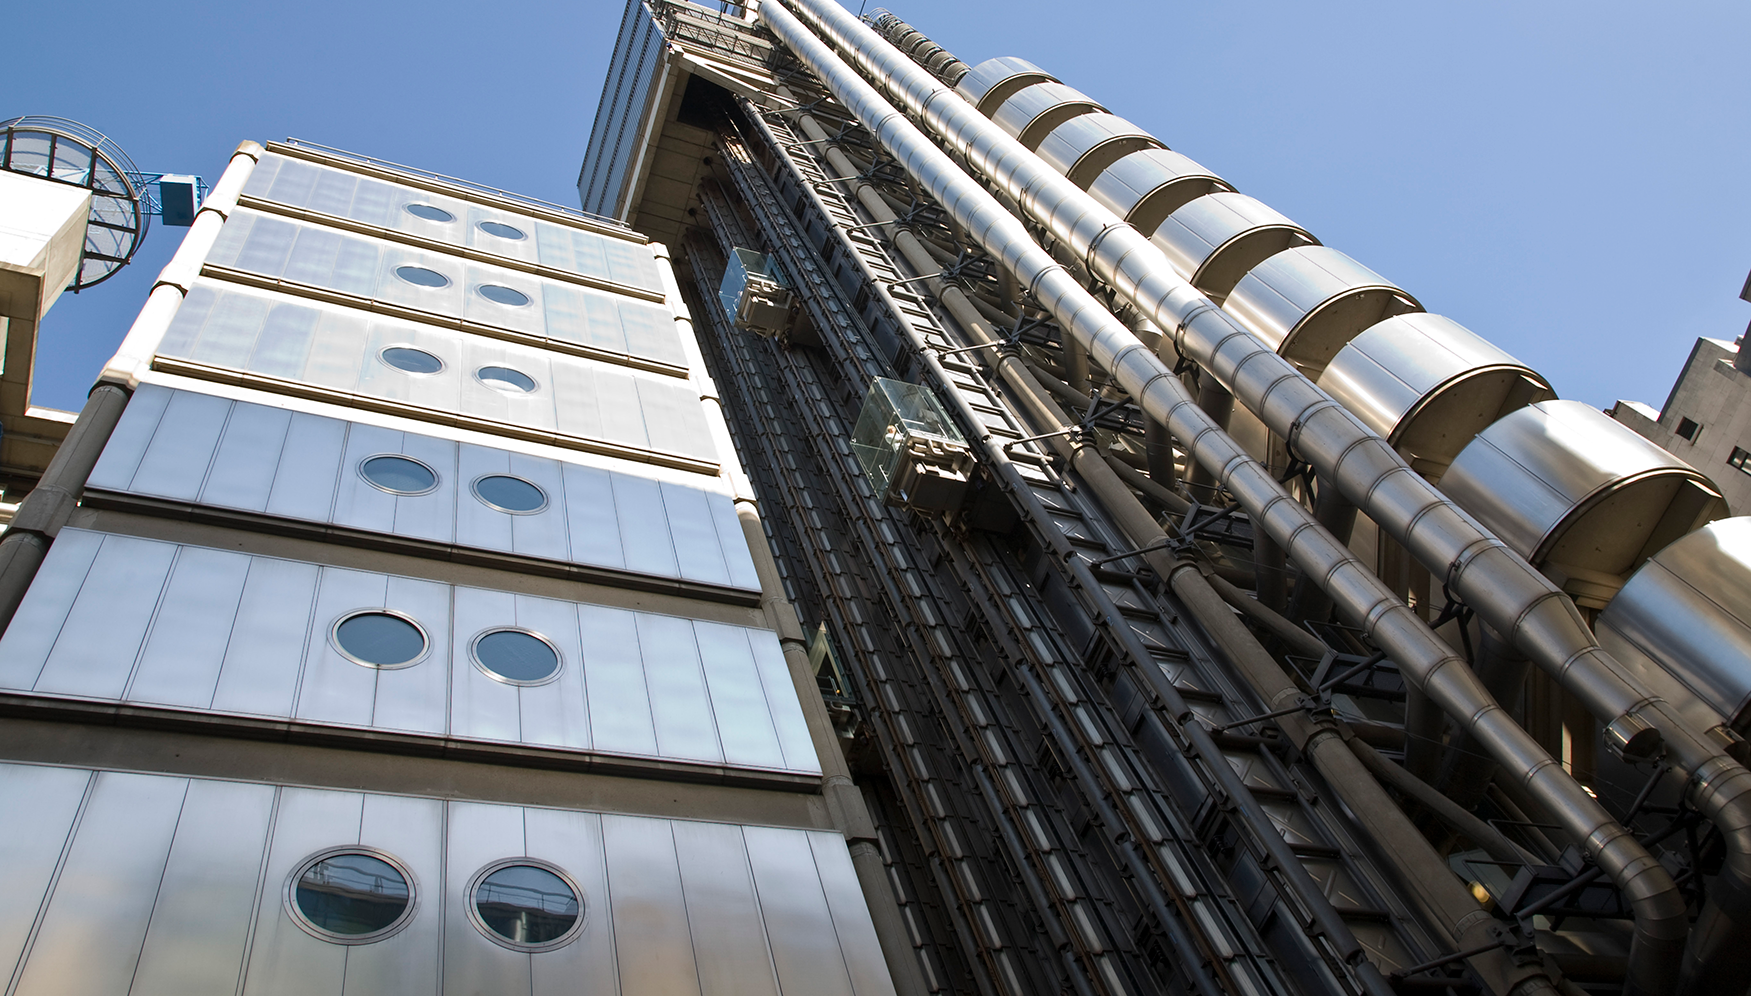 The exterior of the Lloyd's building